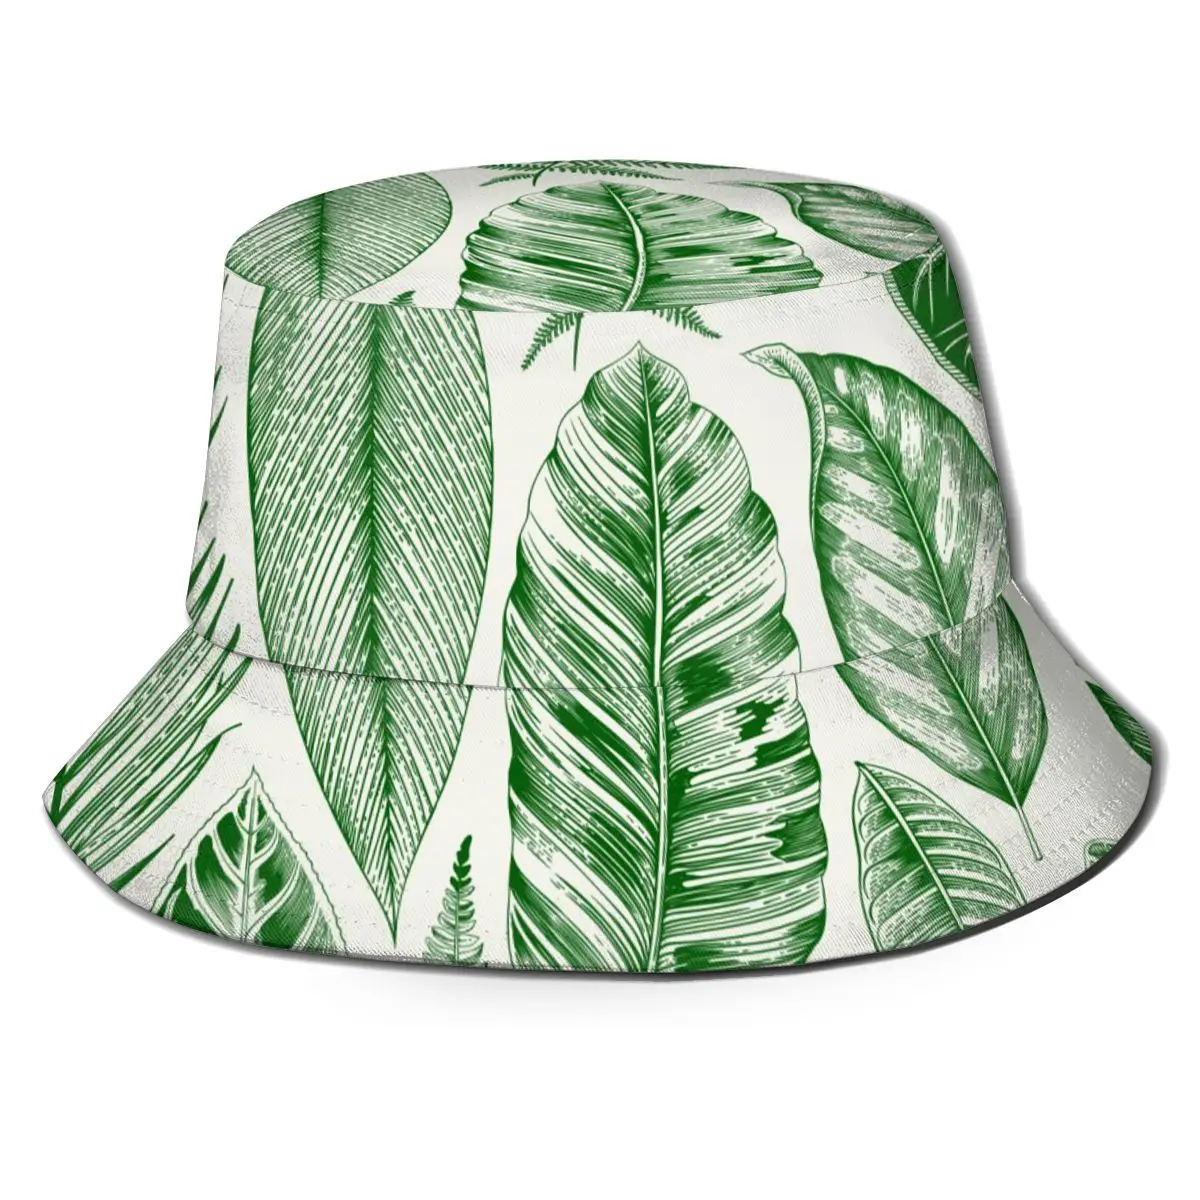 

CINESSD New Fashion Bucket Hats Fisherman Caps For Women Men Gorras Summer Vintage Floral Leaves Botanical Classic Pattern